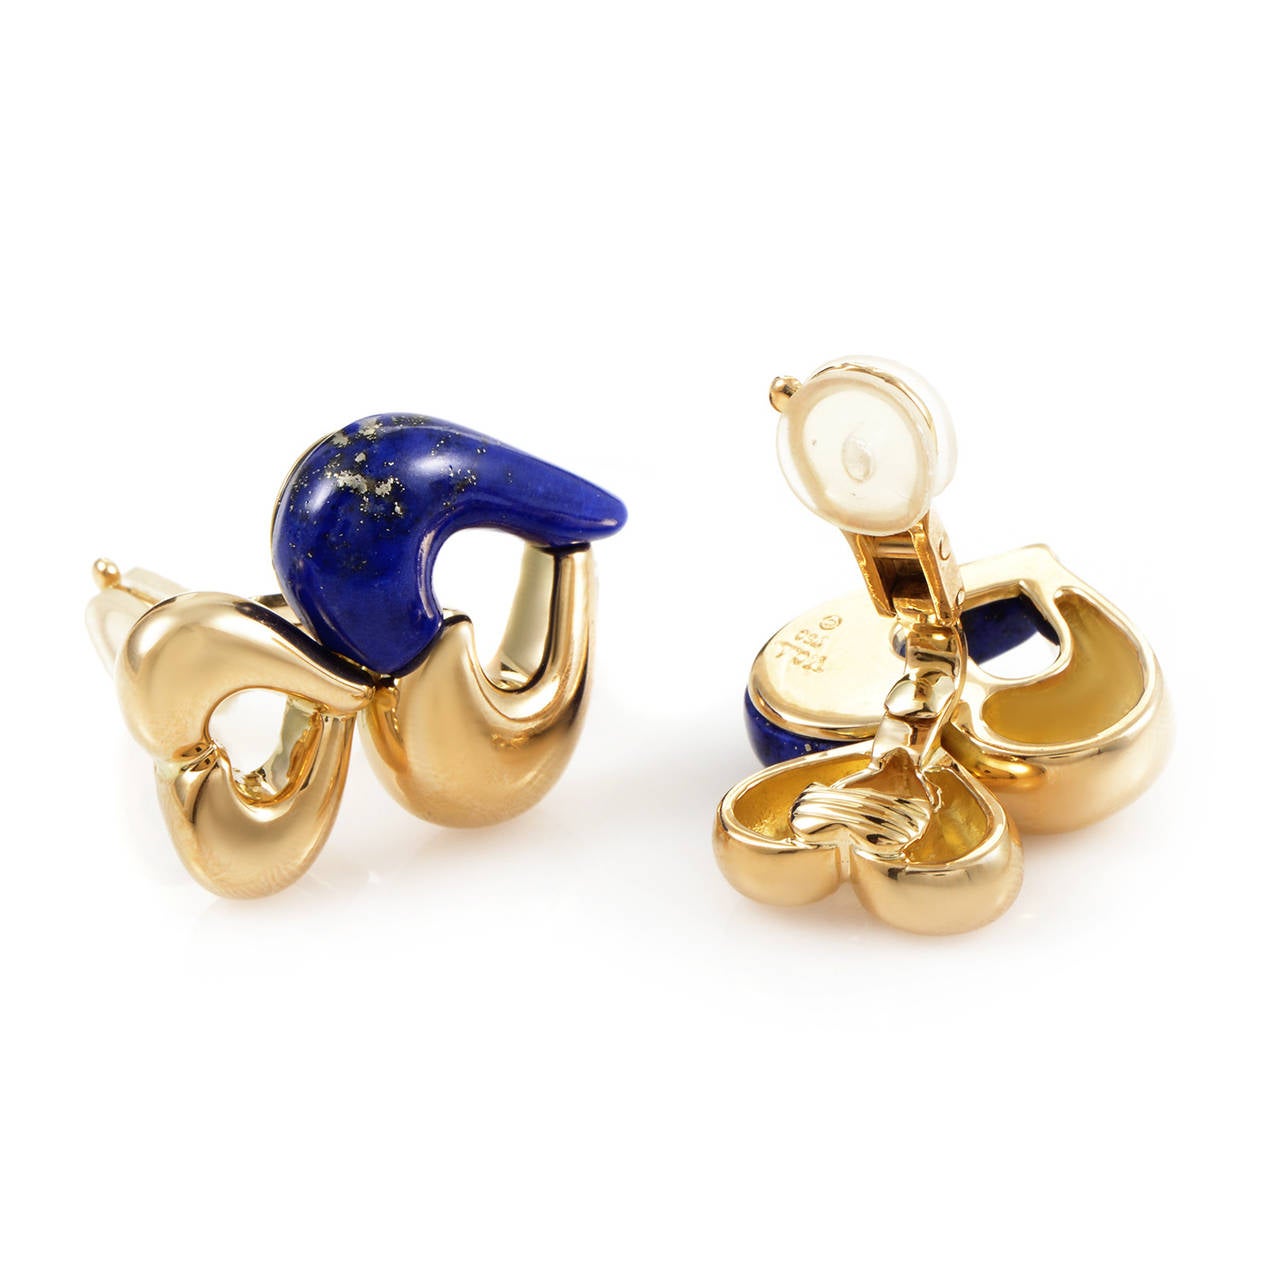 Gorgeous and richly colored, this vintage pair of Van Cleef & Arpels earrings are absolutely divine! The earrings are made of 18K yellow gold and are accented with bright blue lapis stones.